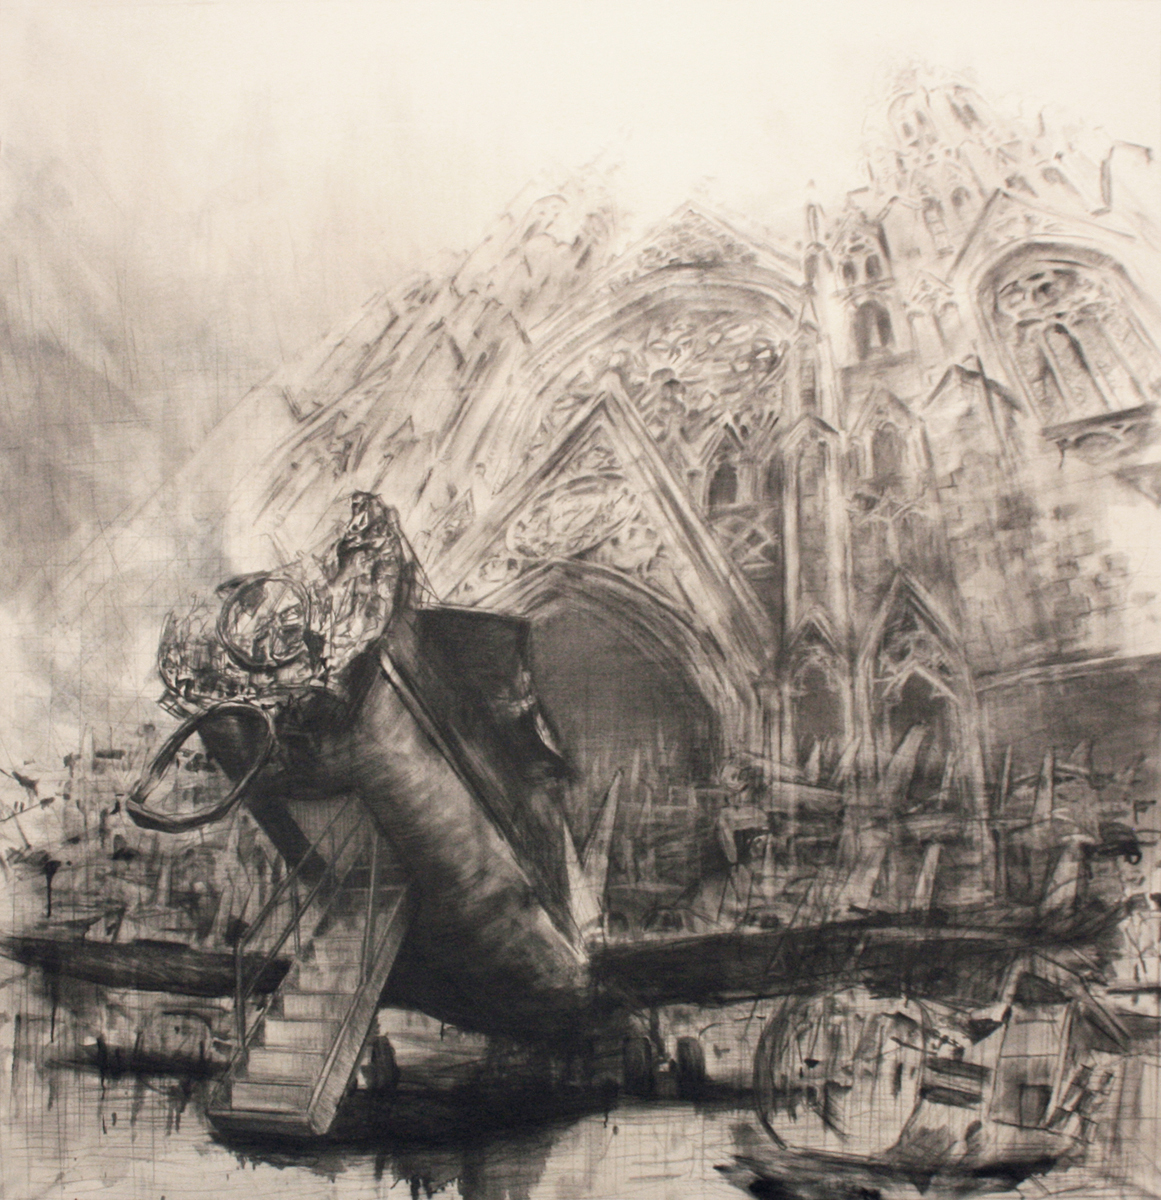 Donald Keefe, The Great Physician, 2012, graphite on canvas, 87” x 85”